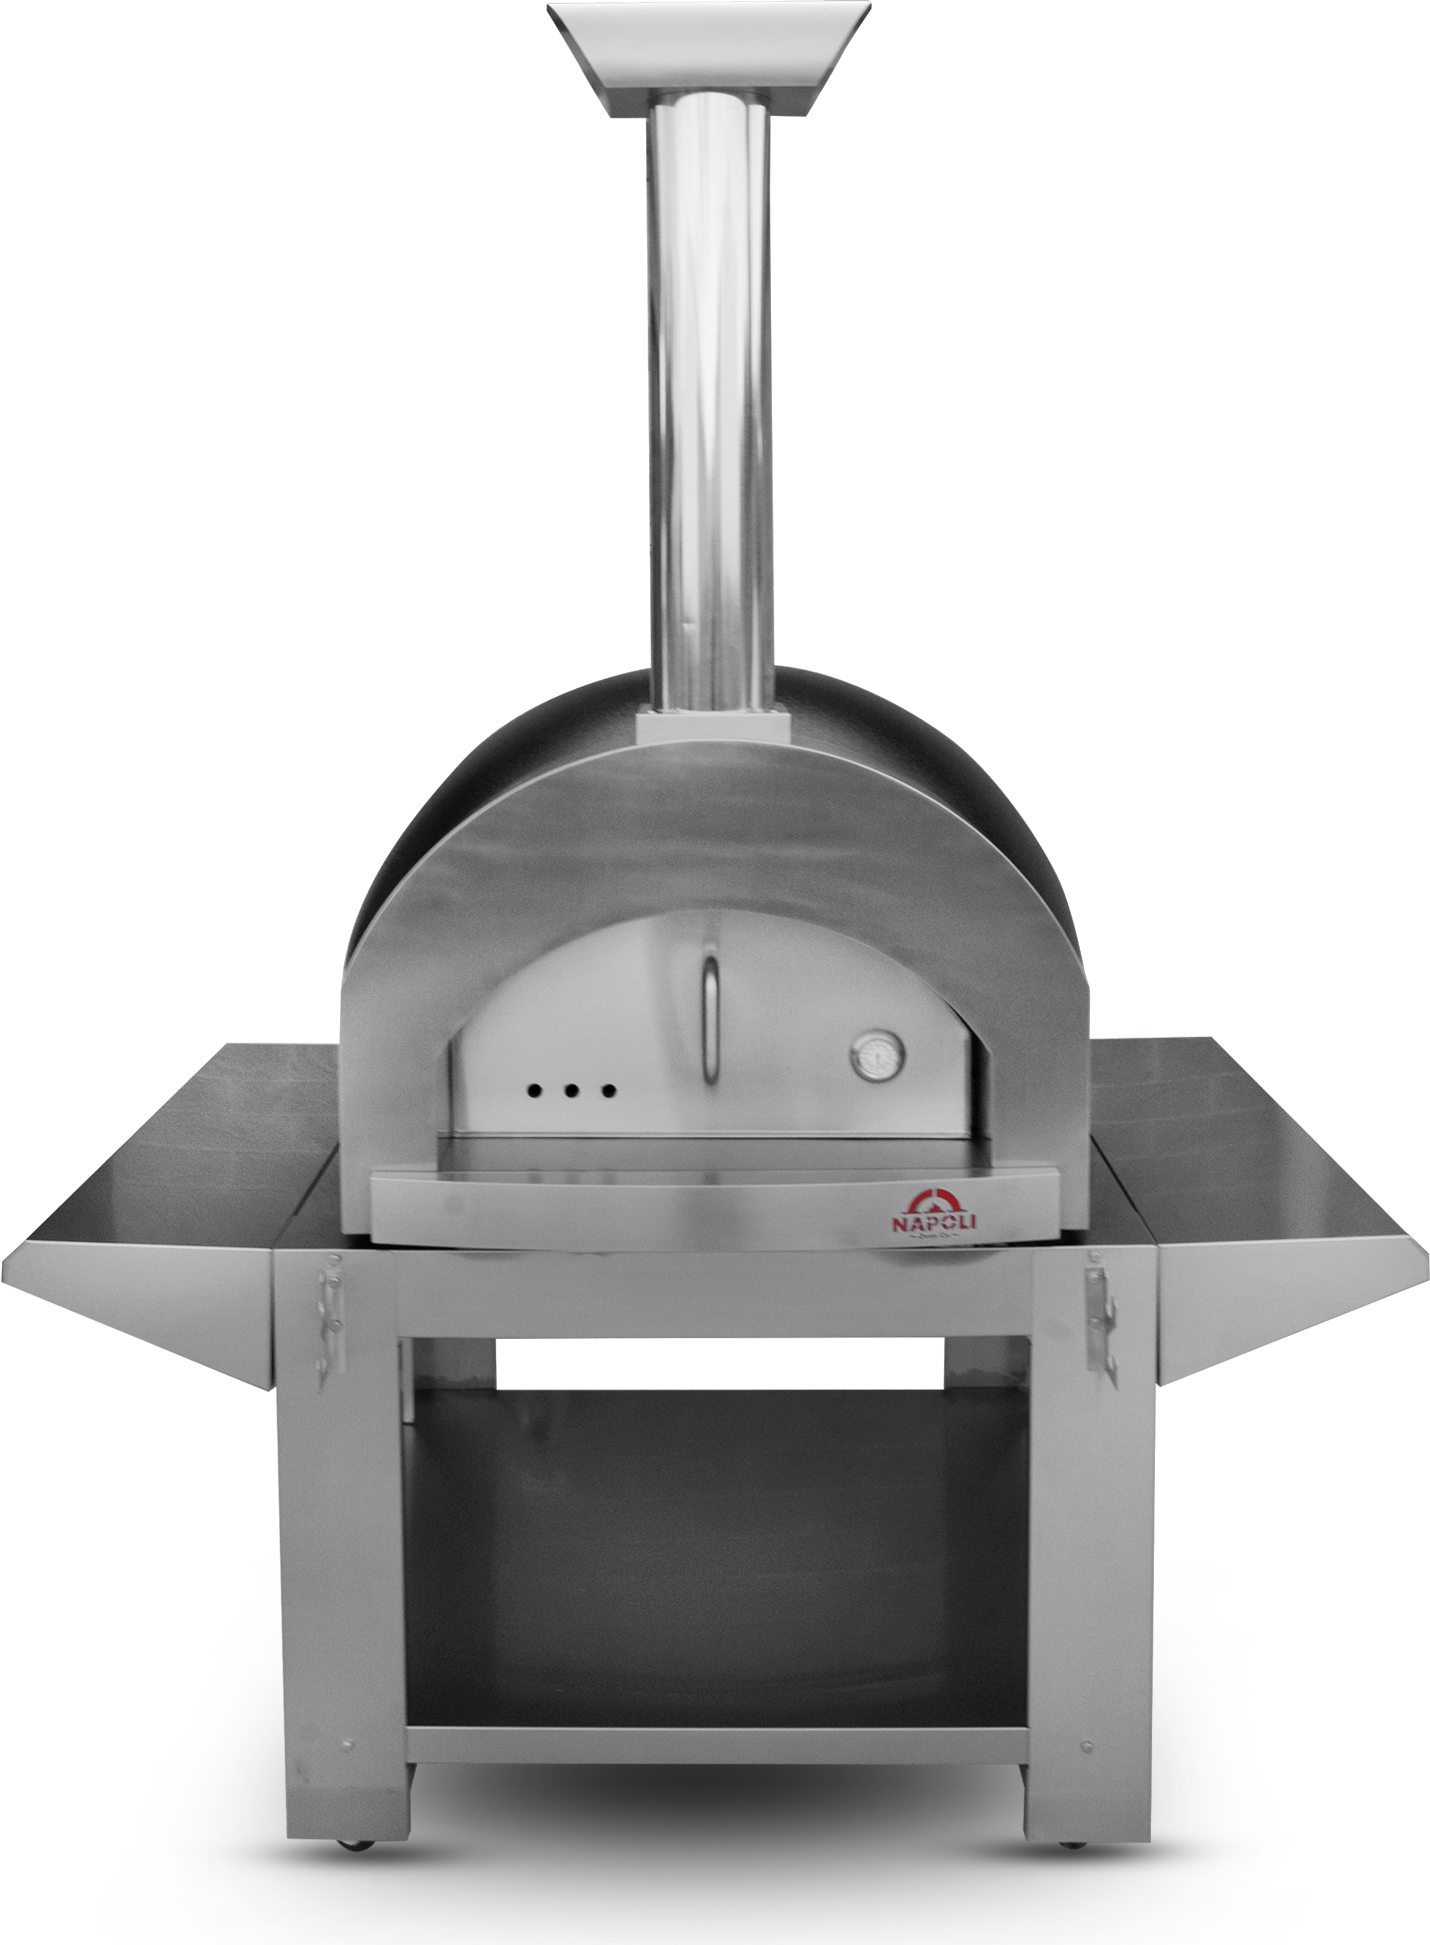 Napoli stainless steel rolling stand - The Woodfired Co.